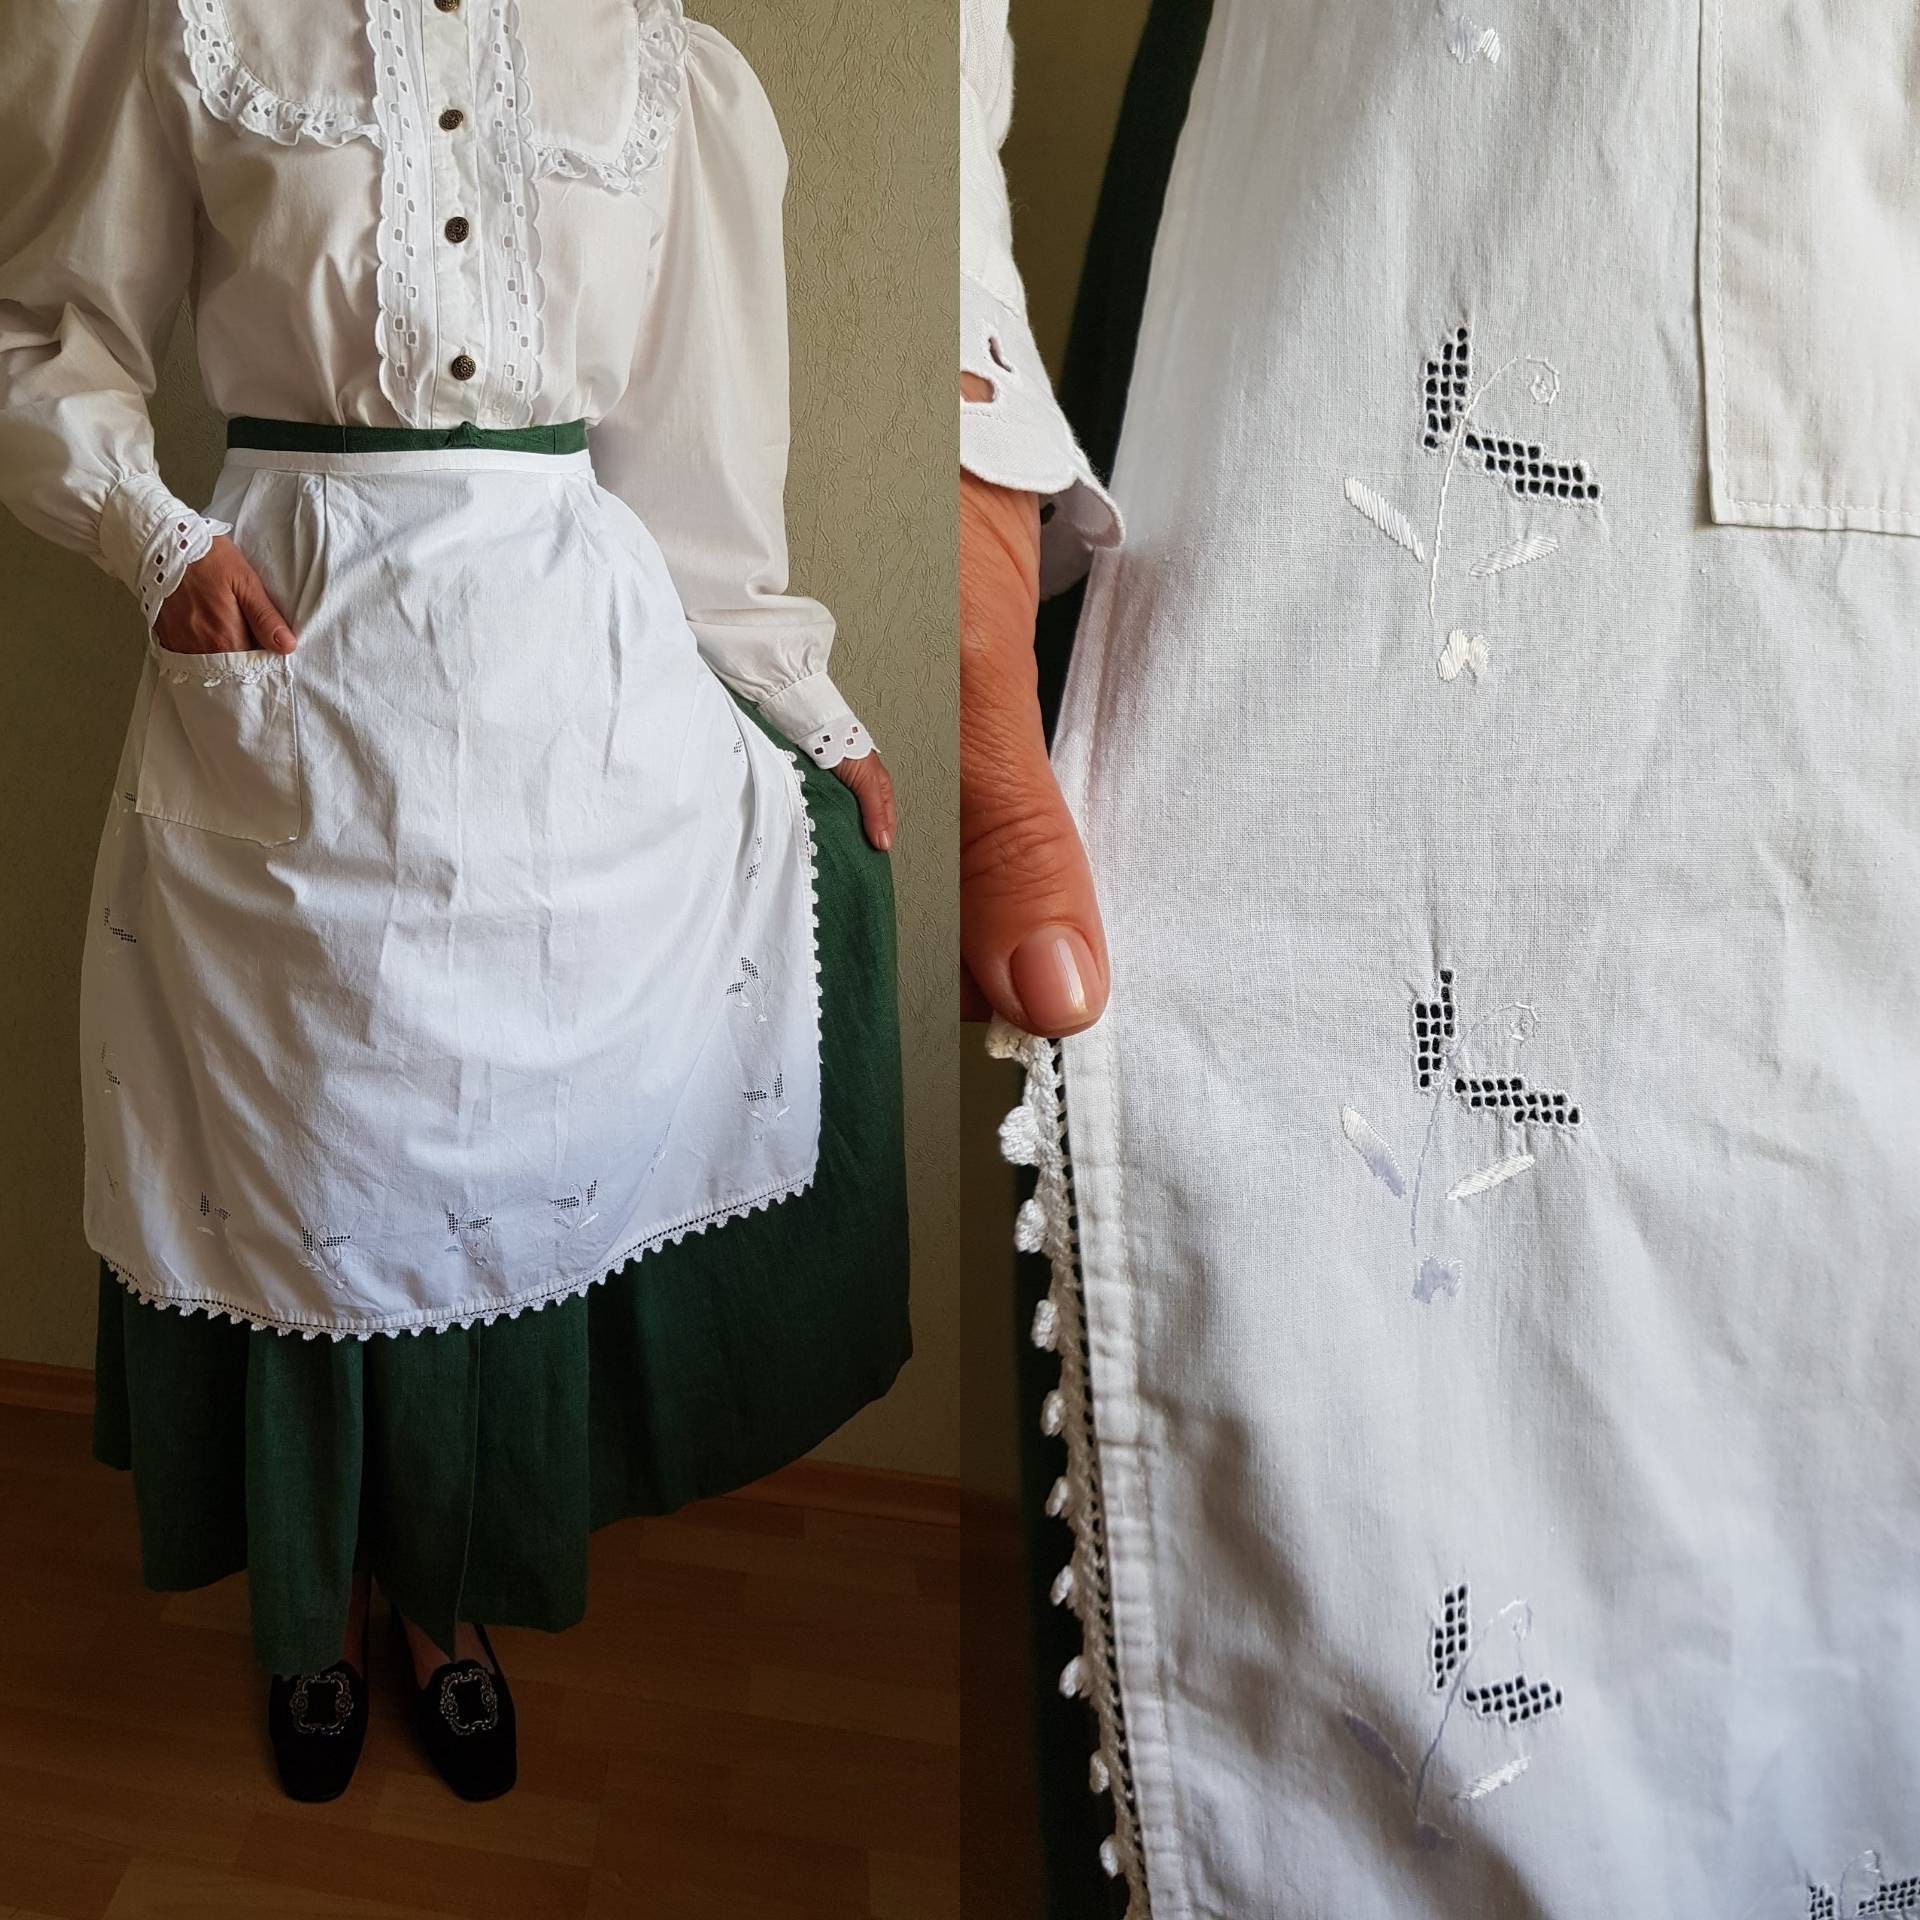 Vintage Aprons, Retro Aprons, Old Fashioned Aprons & Patterns Vintage White Apron, Half Cotton Apron With Embroidery, French Farmhouse $31.00 AT vintagedancer.com